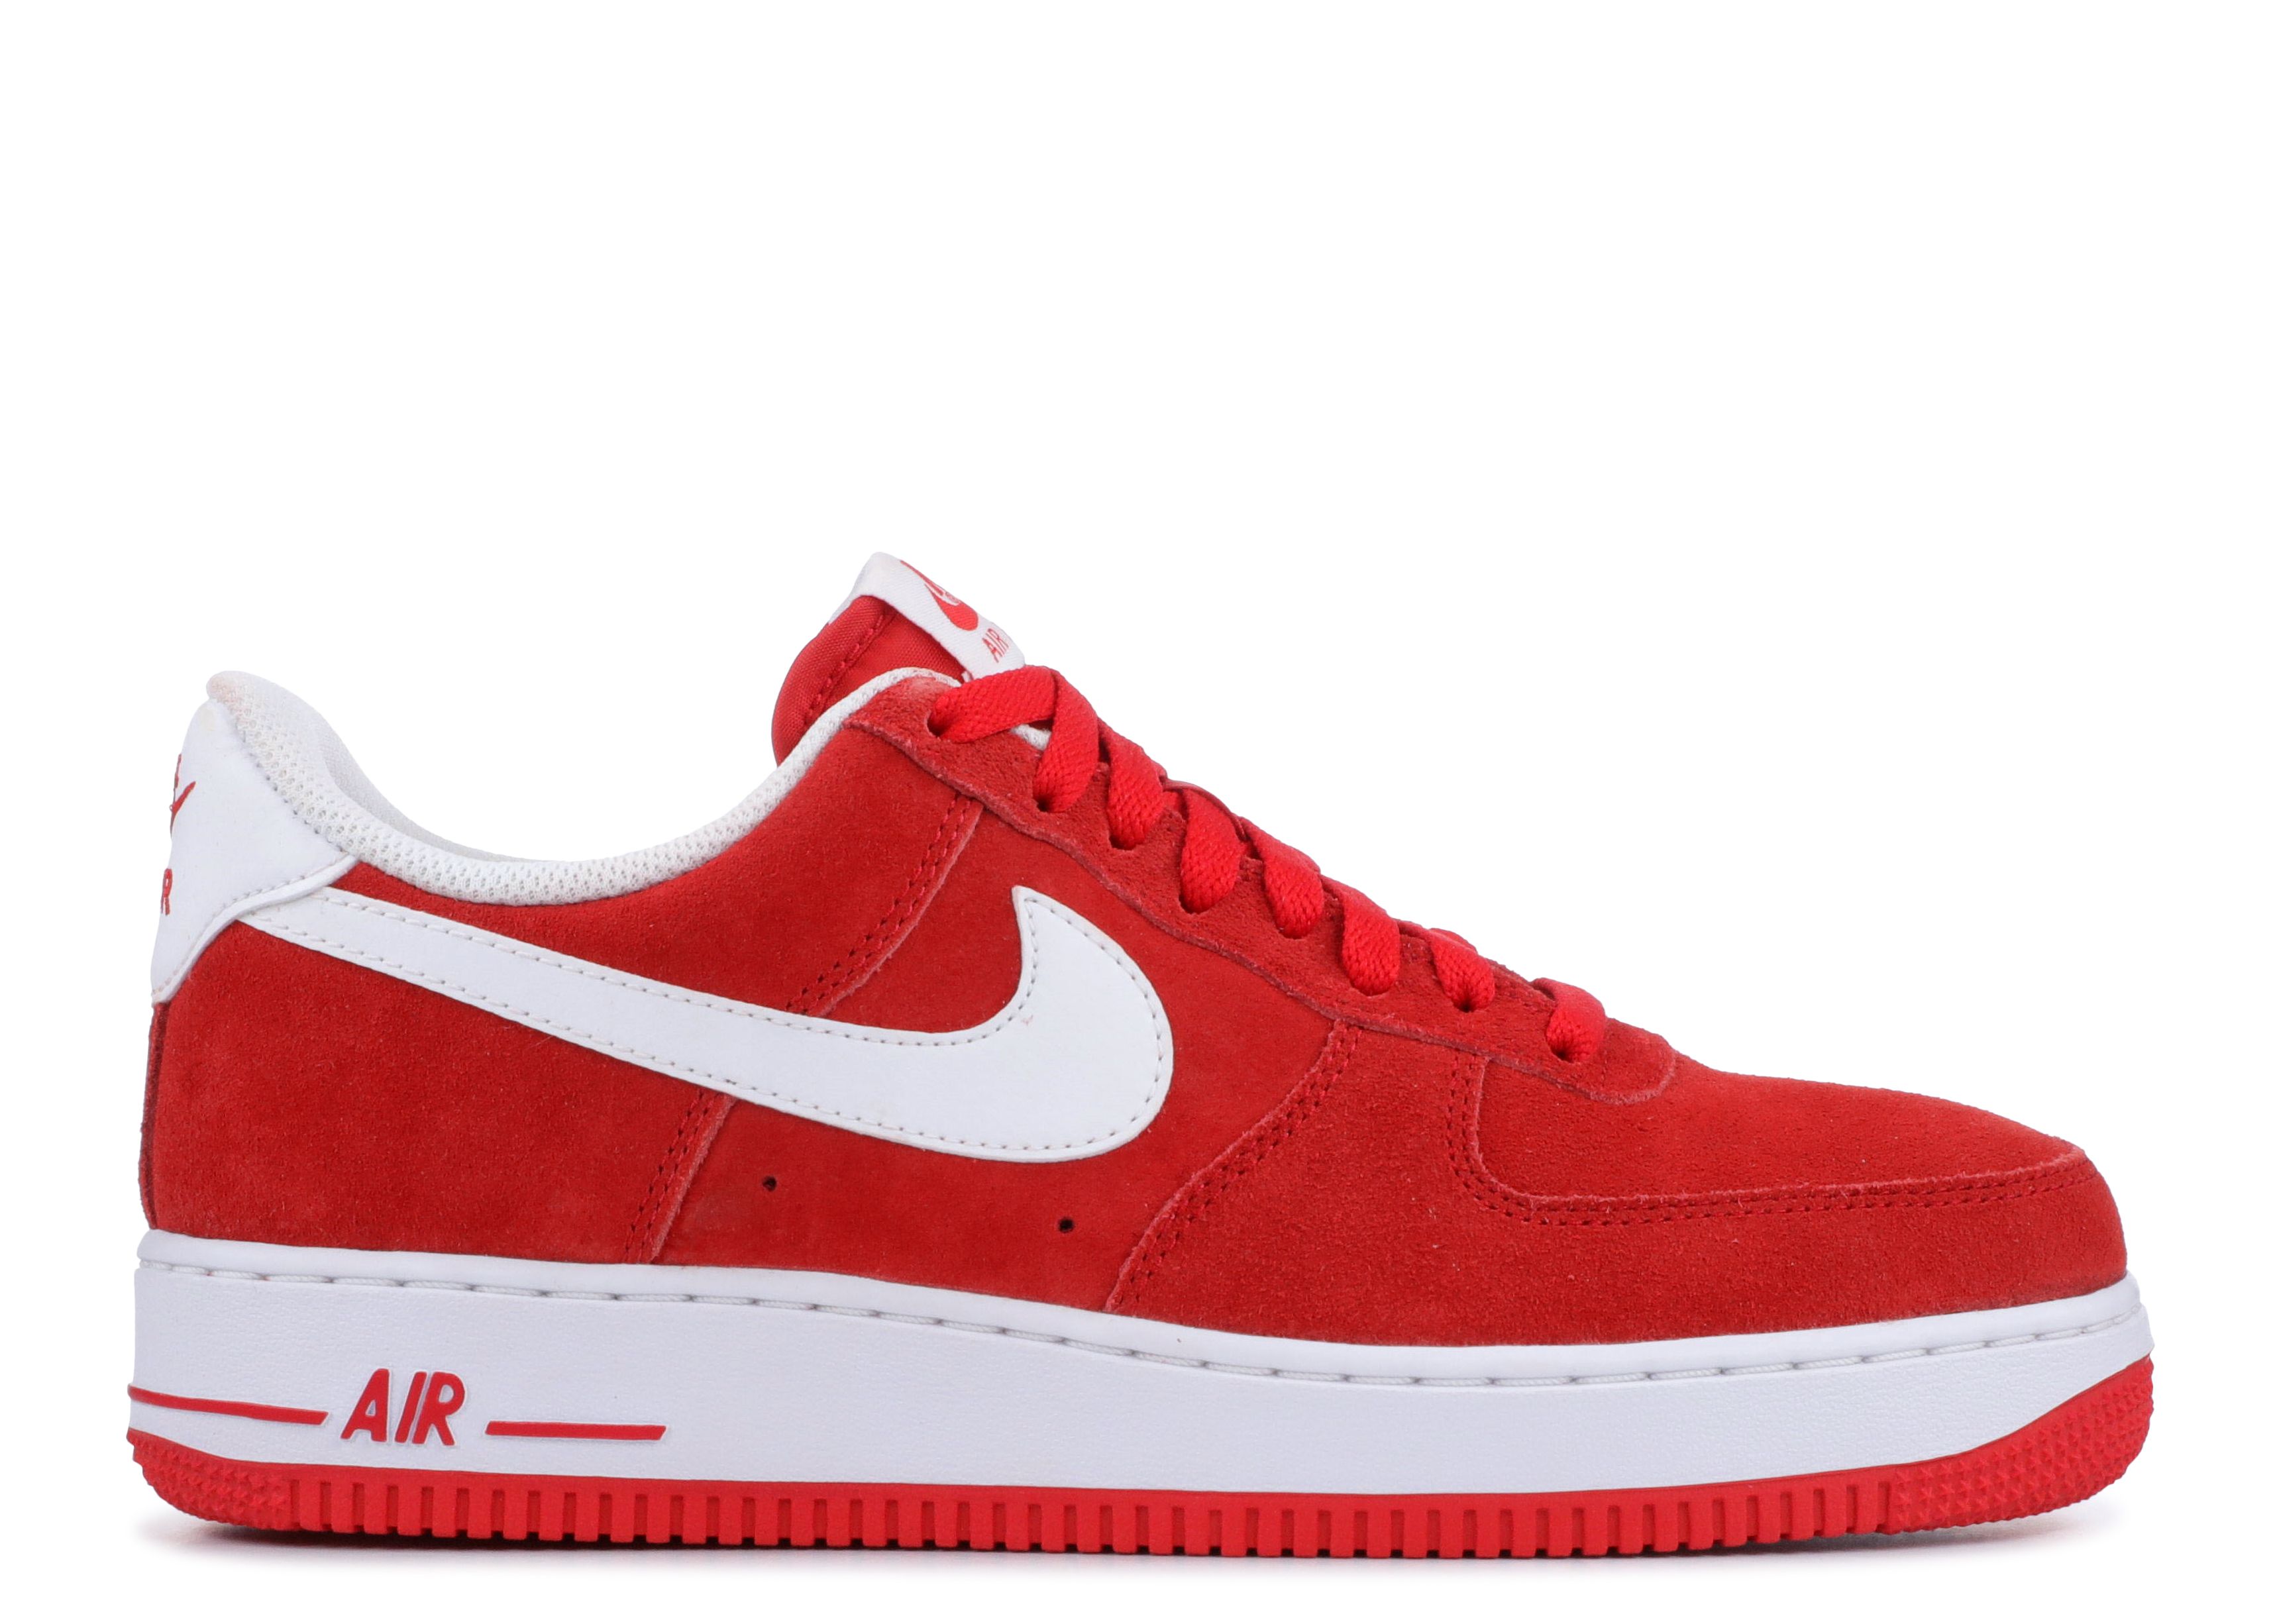 air force one white university red